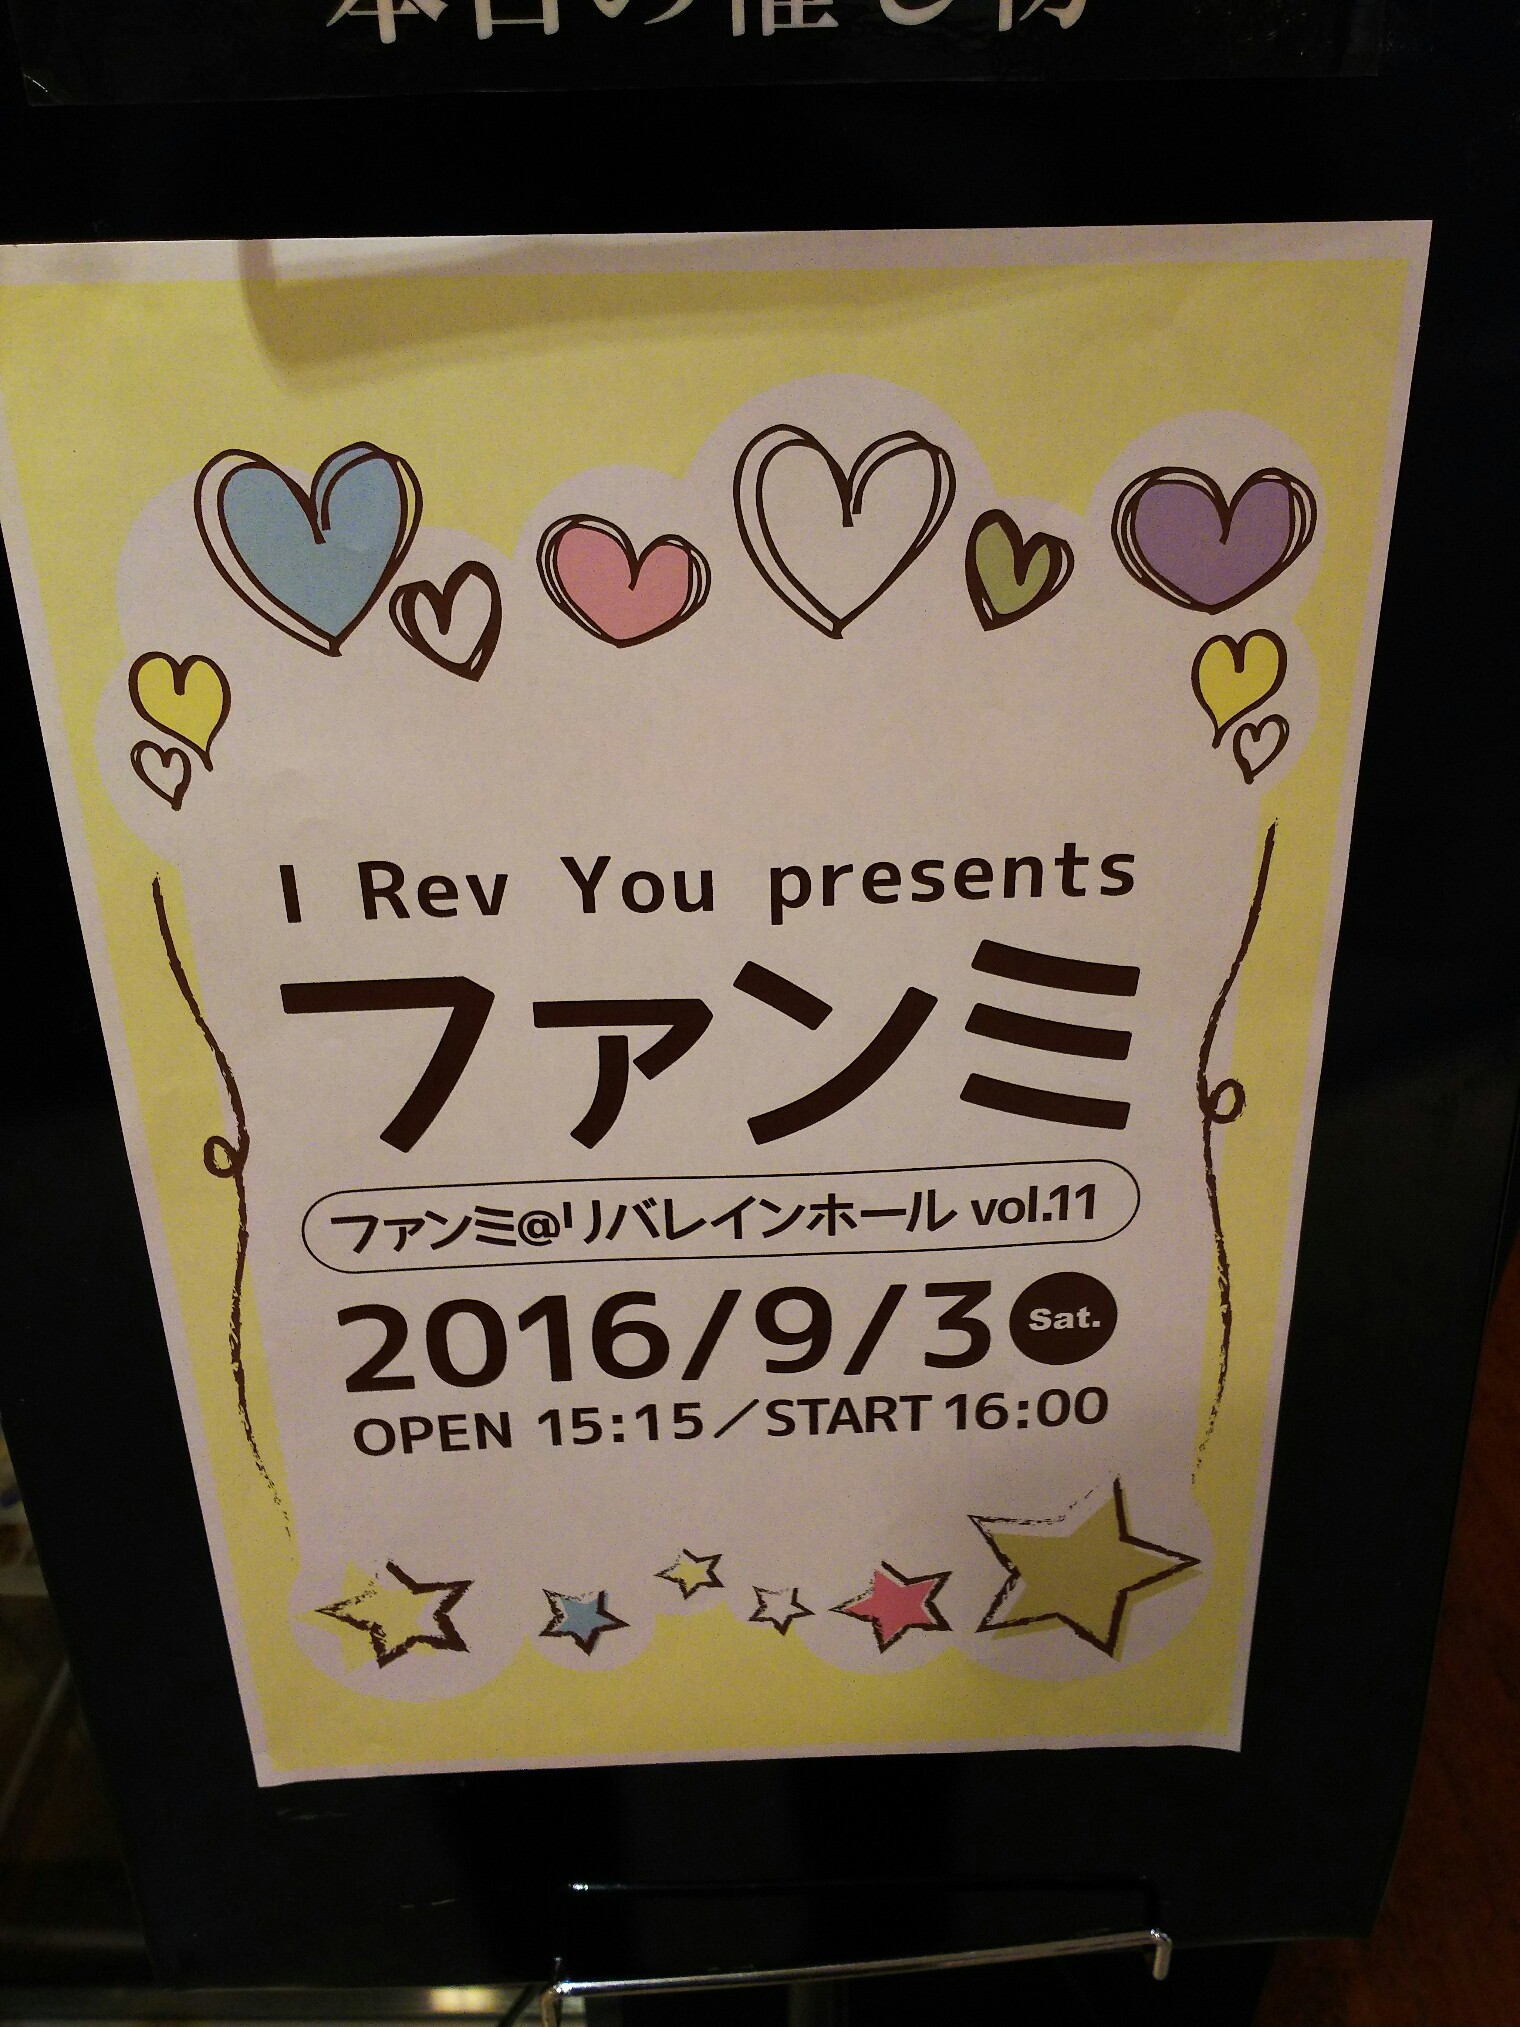 I Rev You Presents ファンミ リバレインホールvol 11 Rev From